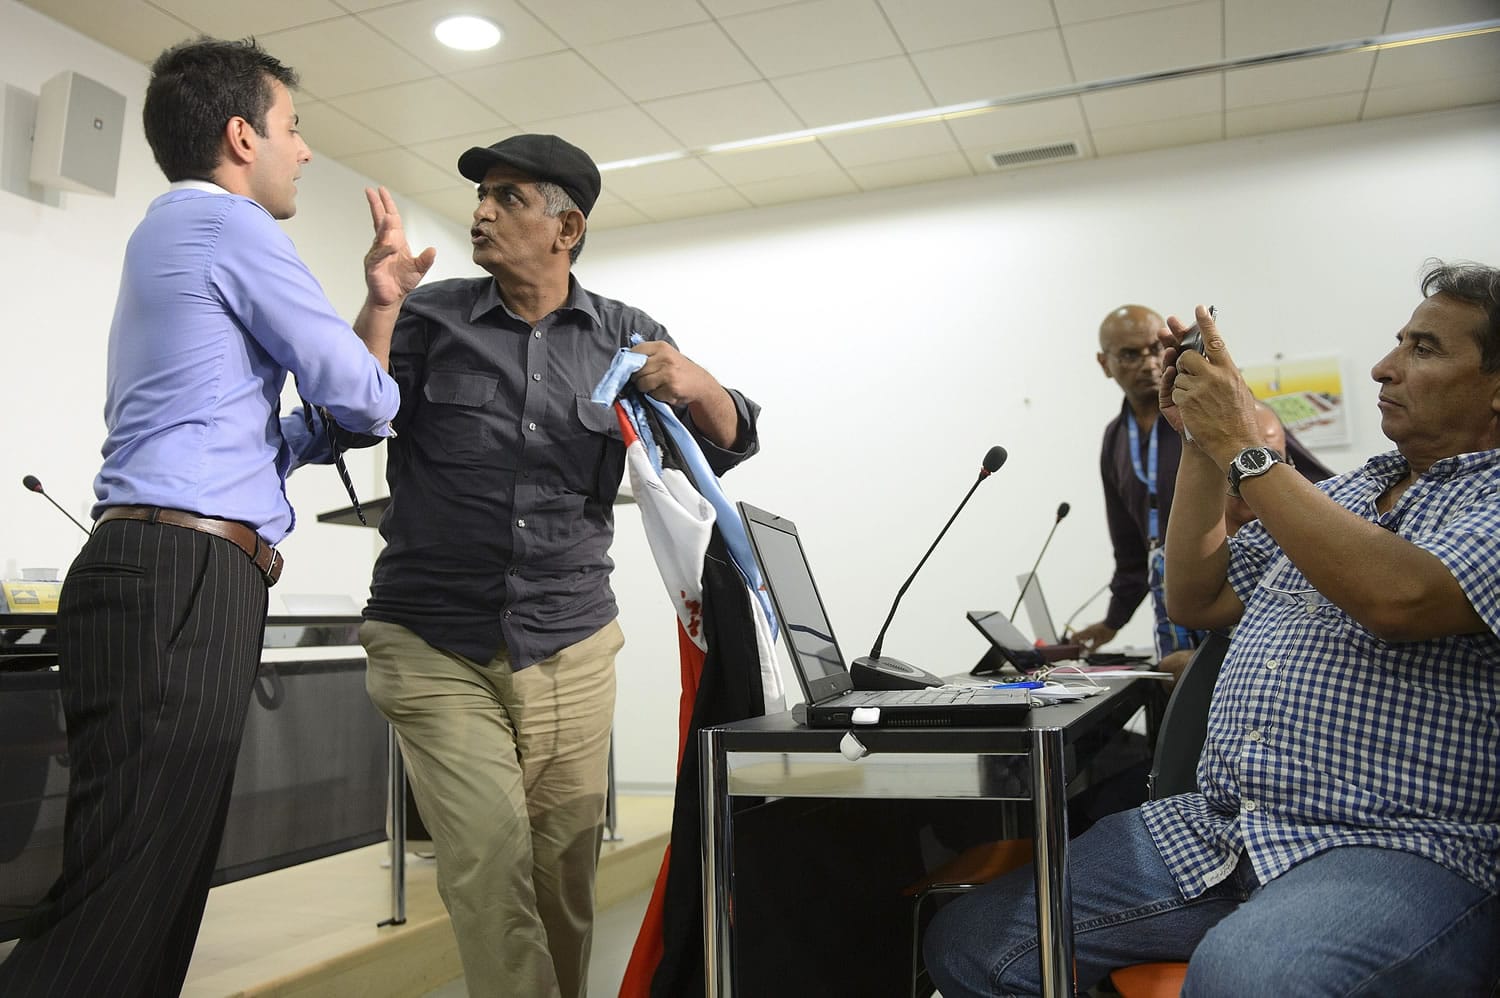 An opposition protester argues with an official during a press conference for the head of the rebel's delegation on Yemen peace talks at the Geneva Press Club in Geneva, Switzerland, on Thursday.